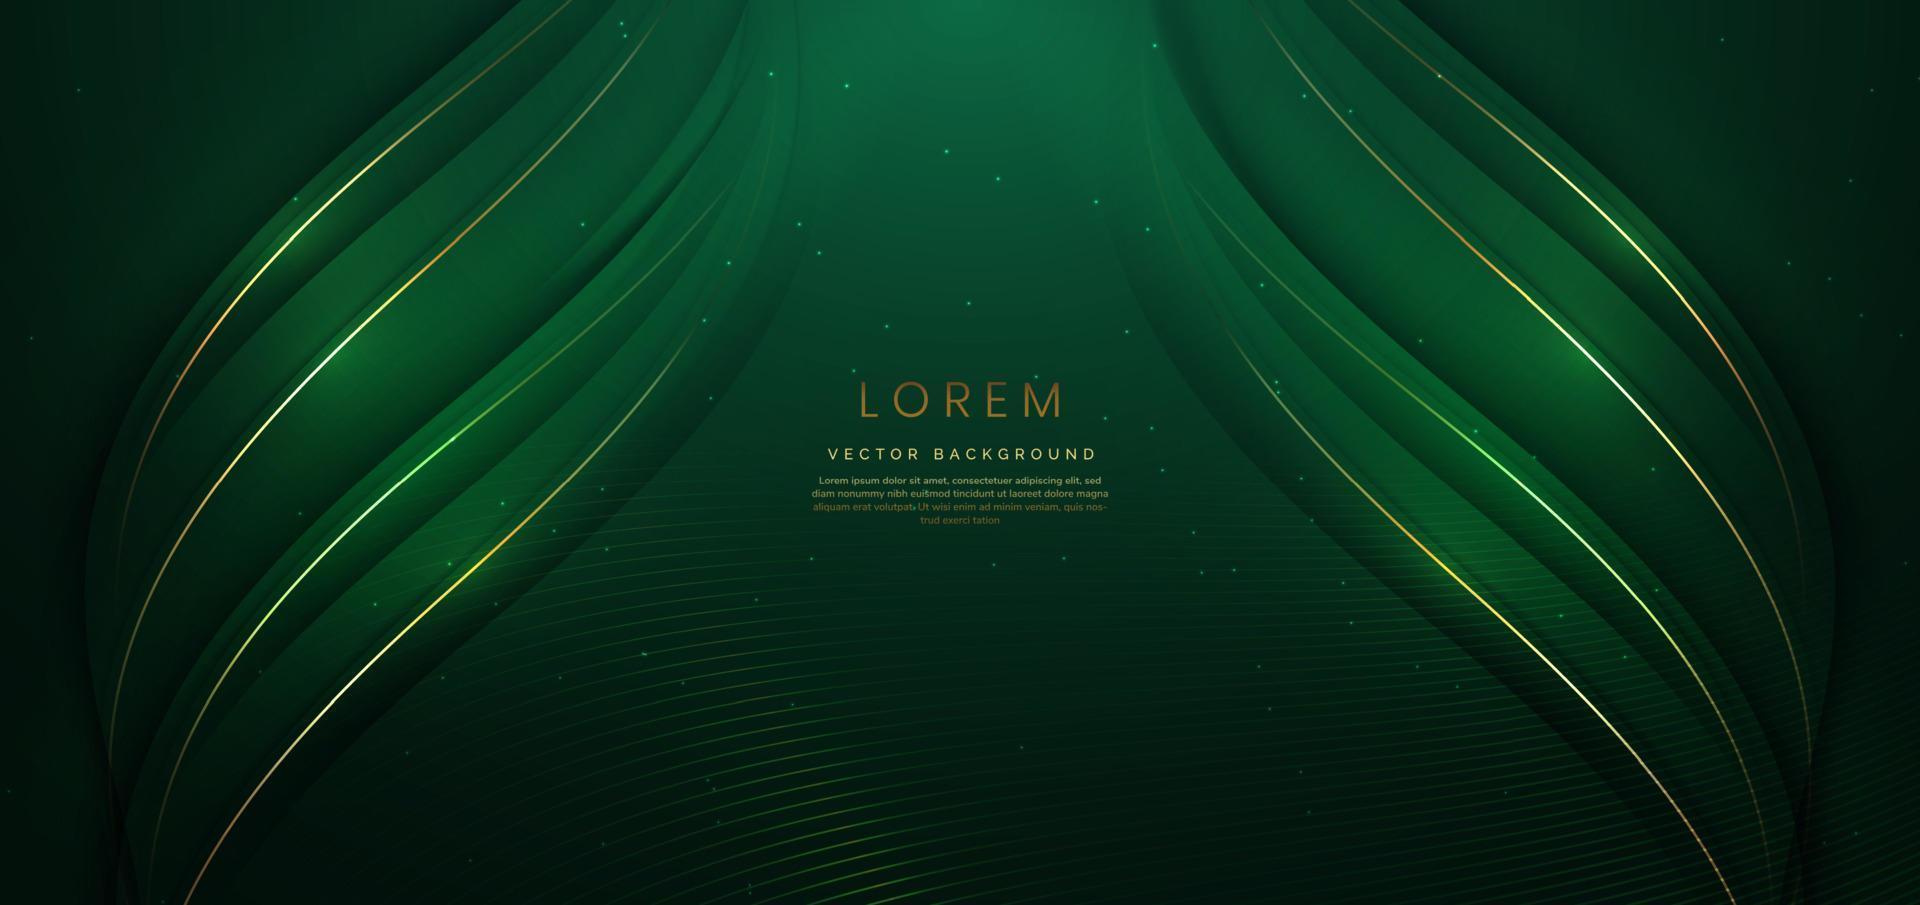 Abstract 3d gold curved green ribbon on dark green background with lighting effect and sparkle with copy space for text. Luxury design style. vector